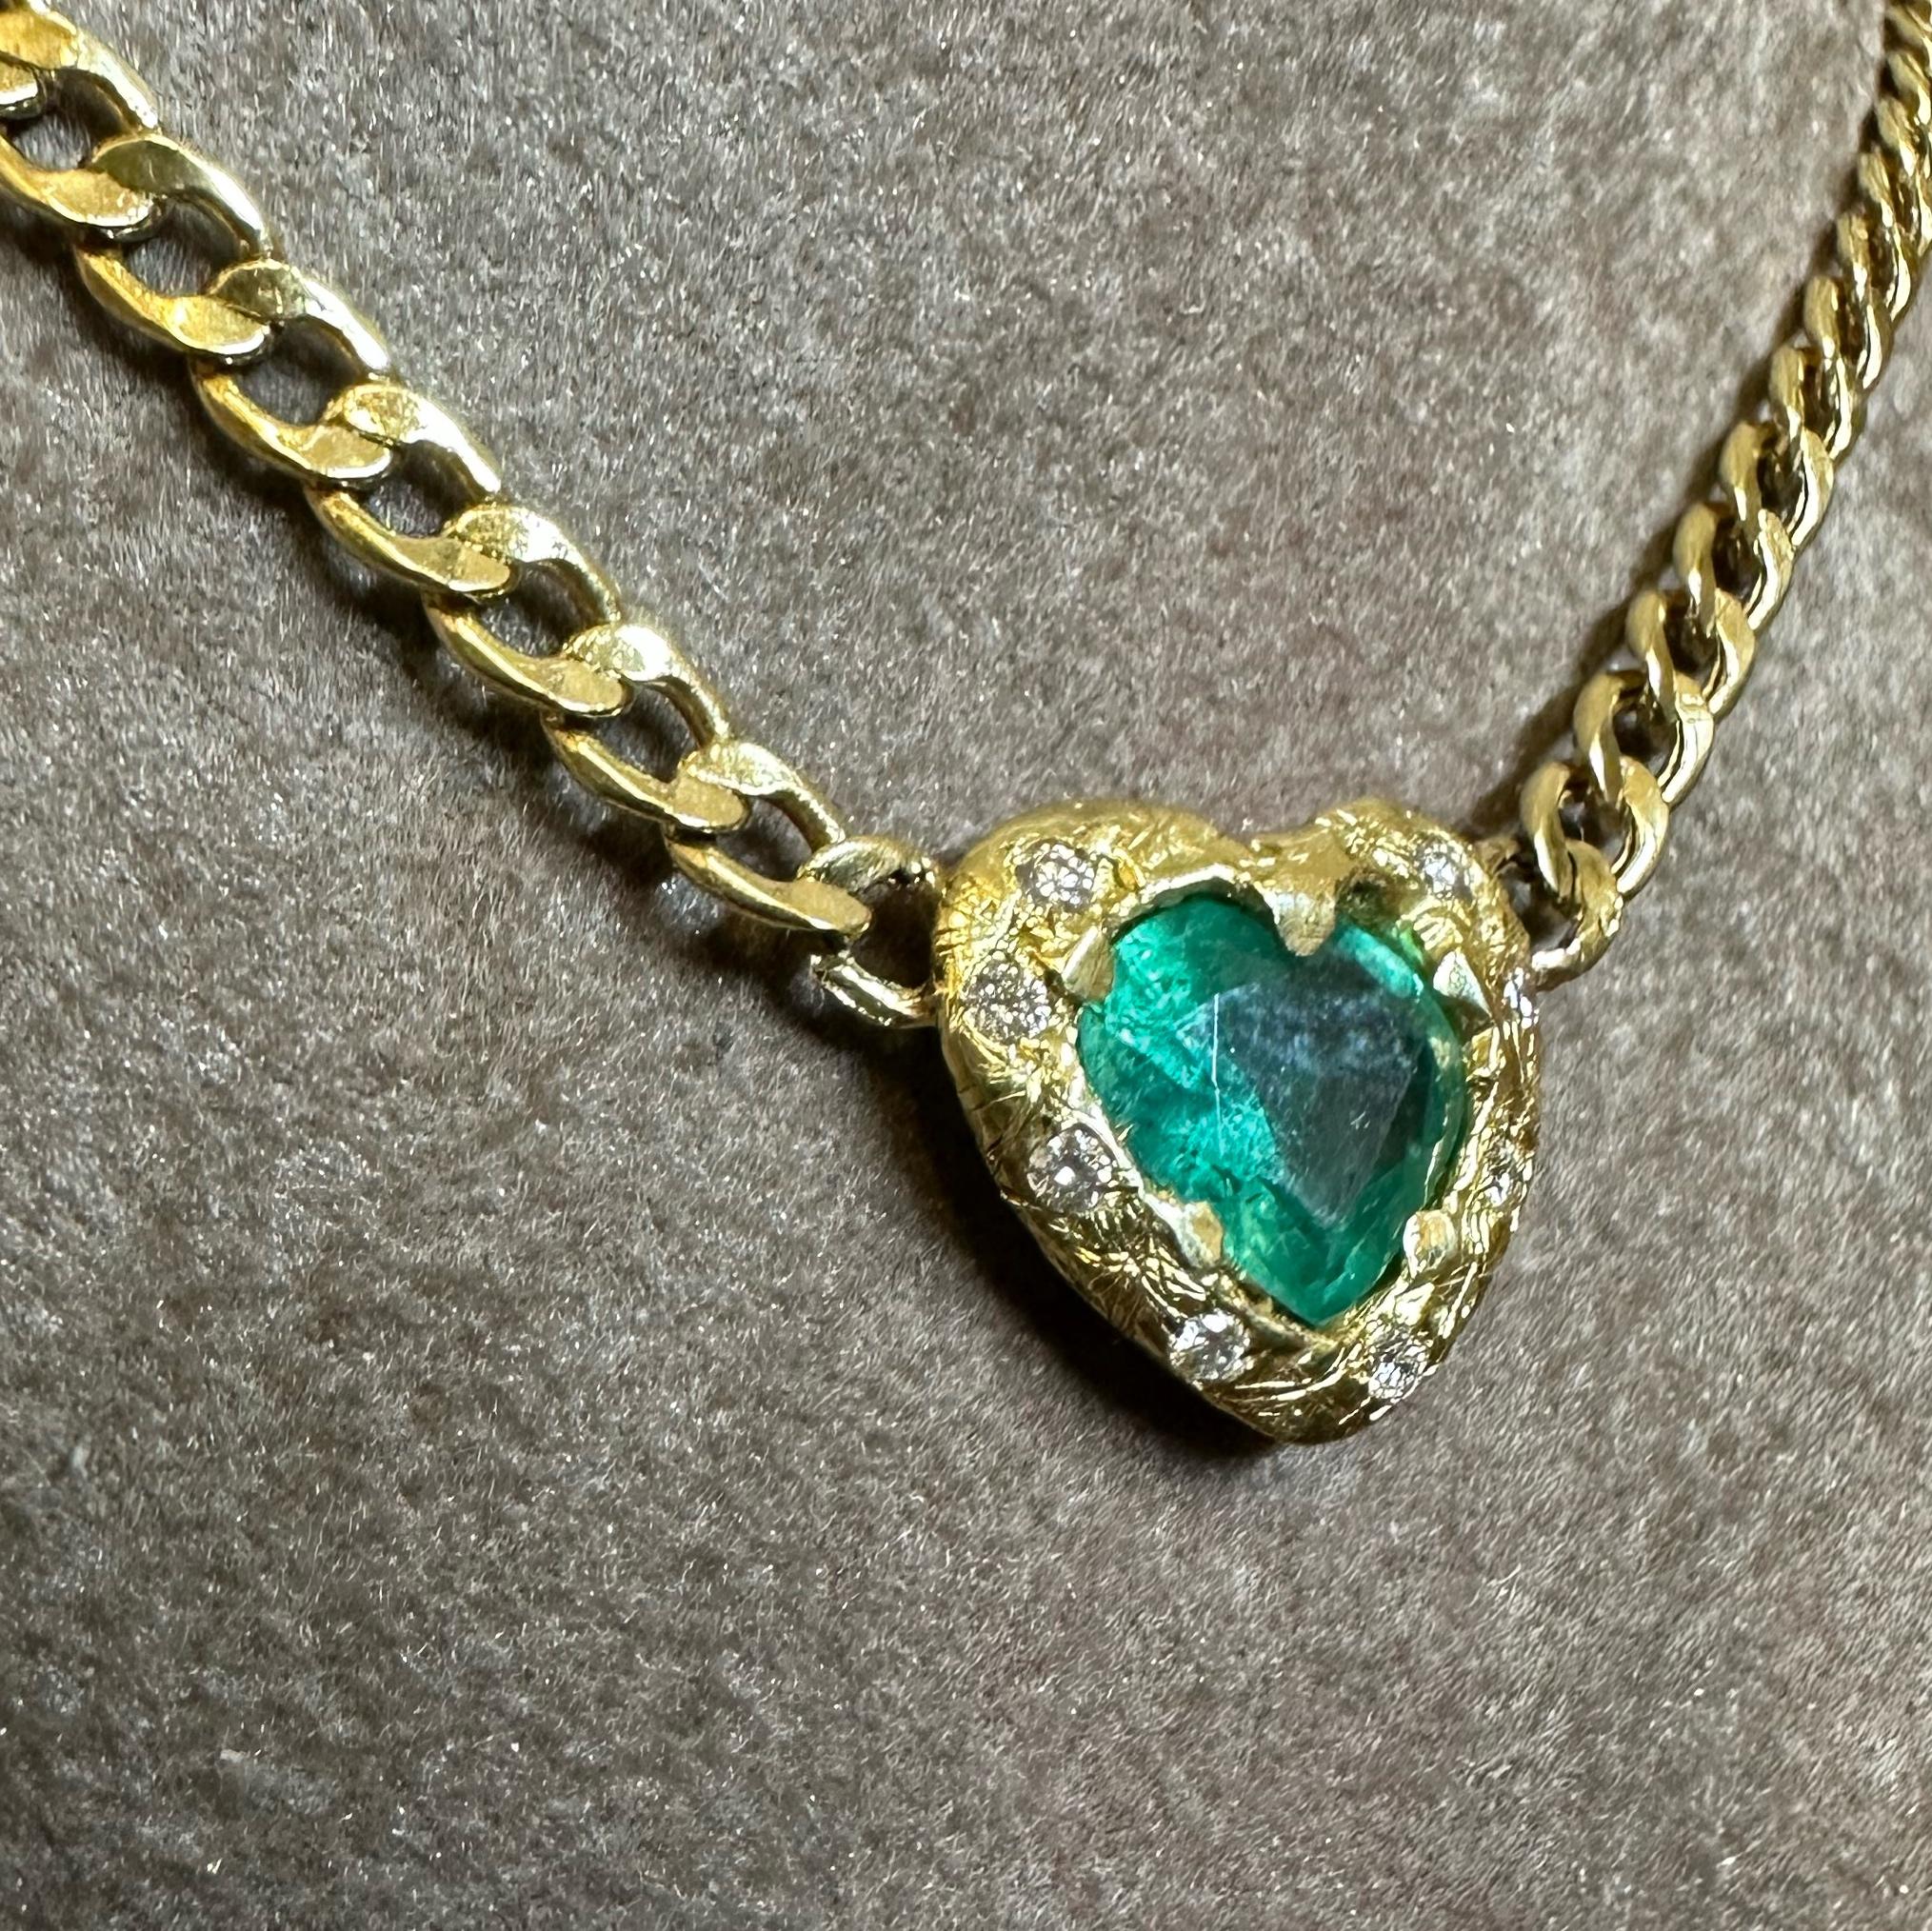 Introducing our stunning 18K Yellow Gold Natural Emerald Heart with Diamonds Necklace on a Semi Hollow Cuban Link Chain.

Bring a touch of luxury to your jewelry collection with this exquisite piece. The necklace features a beautiful heart-shaped